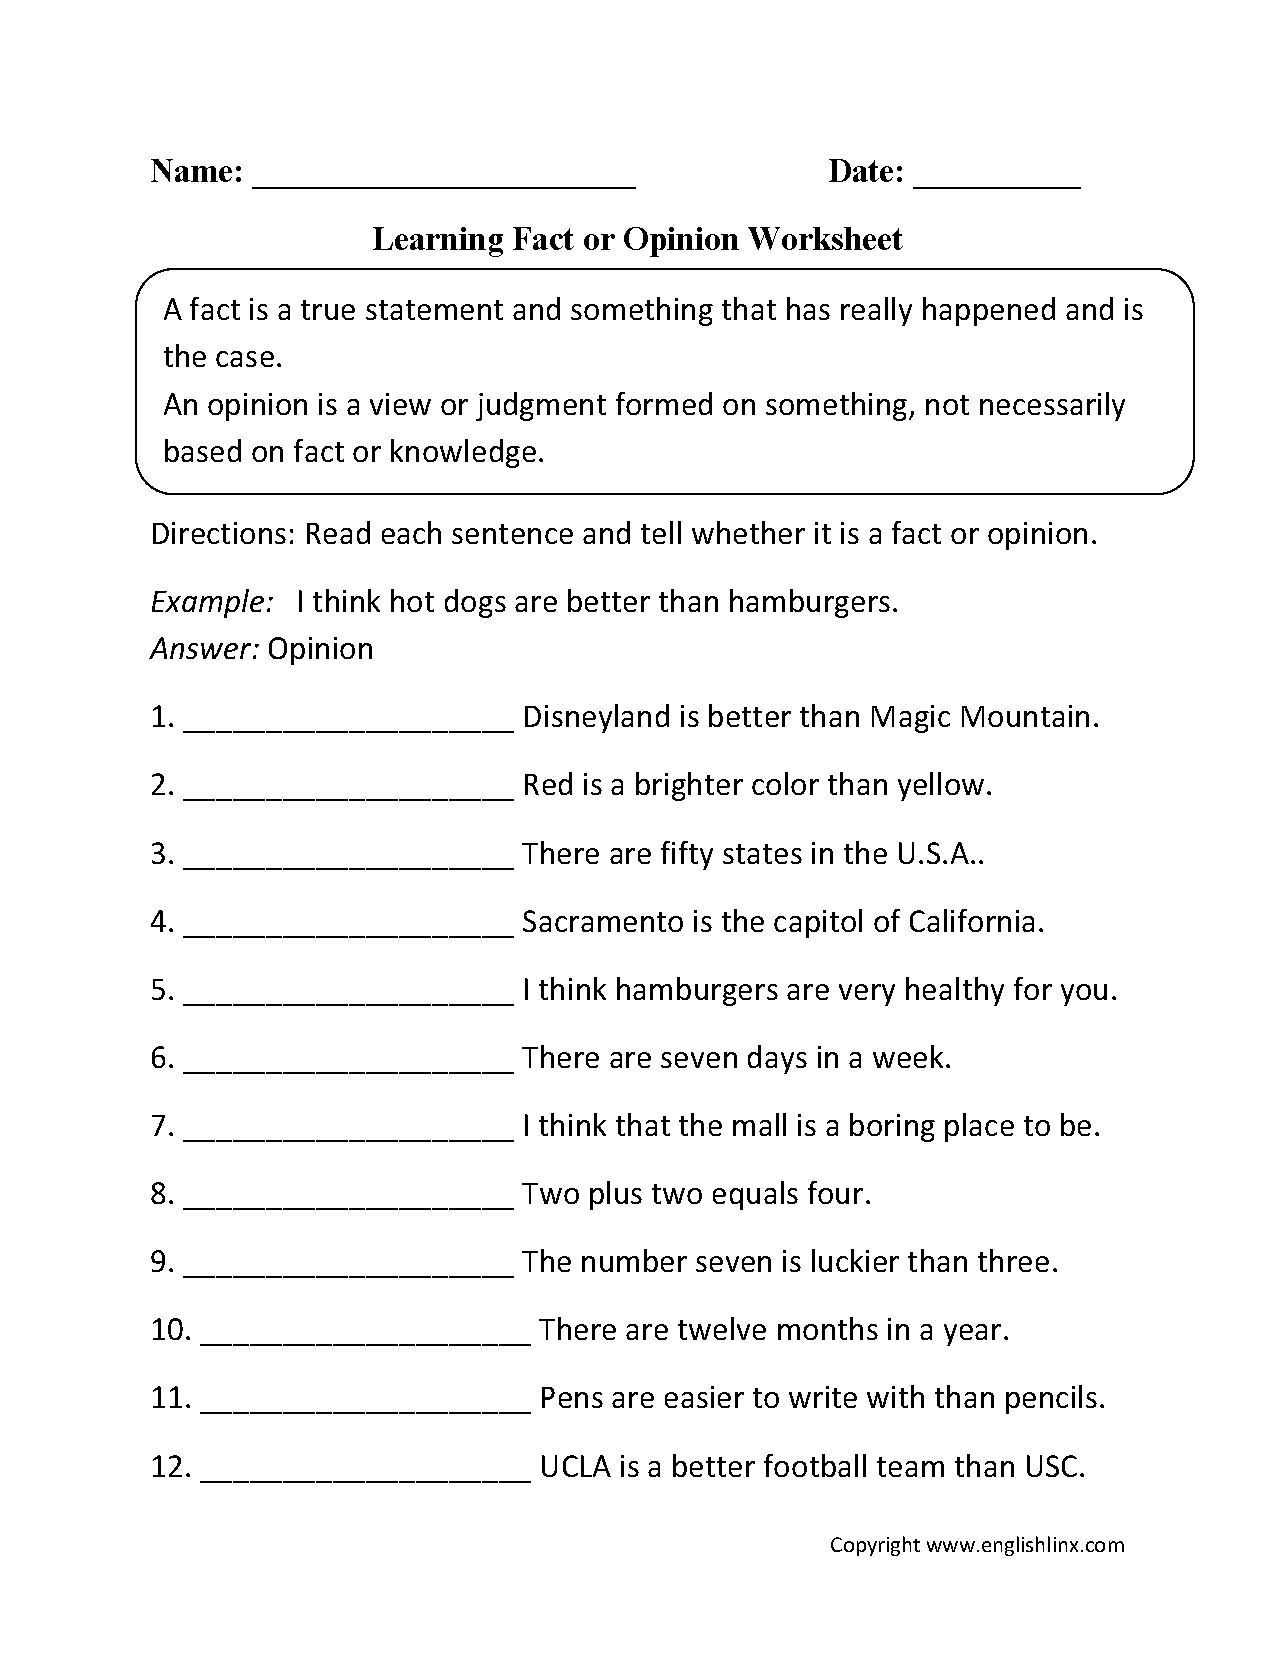 Learning Fact or Opinion Worksheets